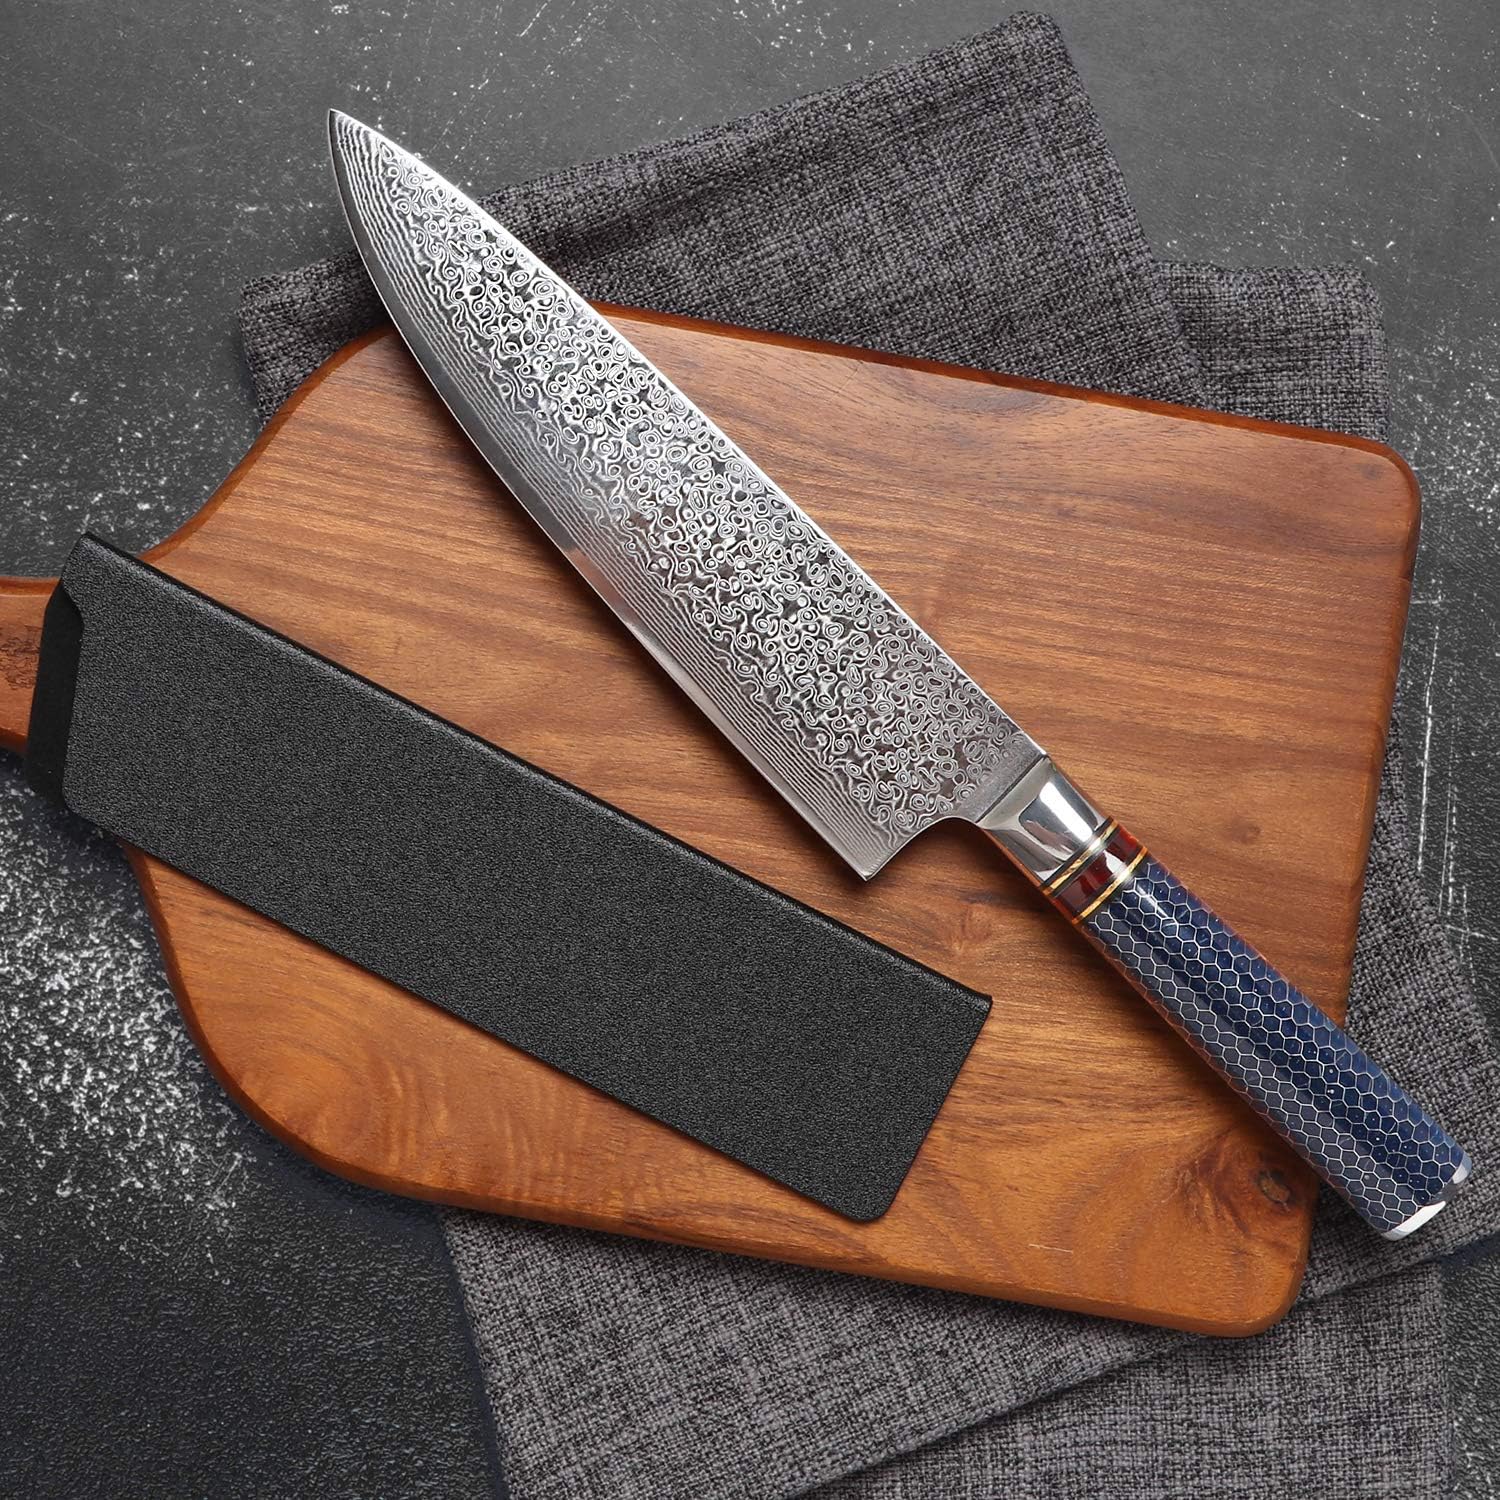 KD Japanese VG10 Kitchen Knife 67-Layer Damascus Steel with Gift Box